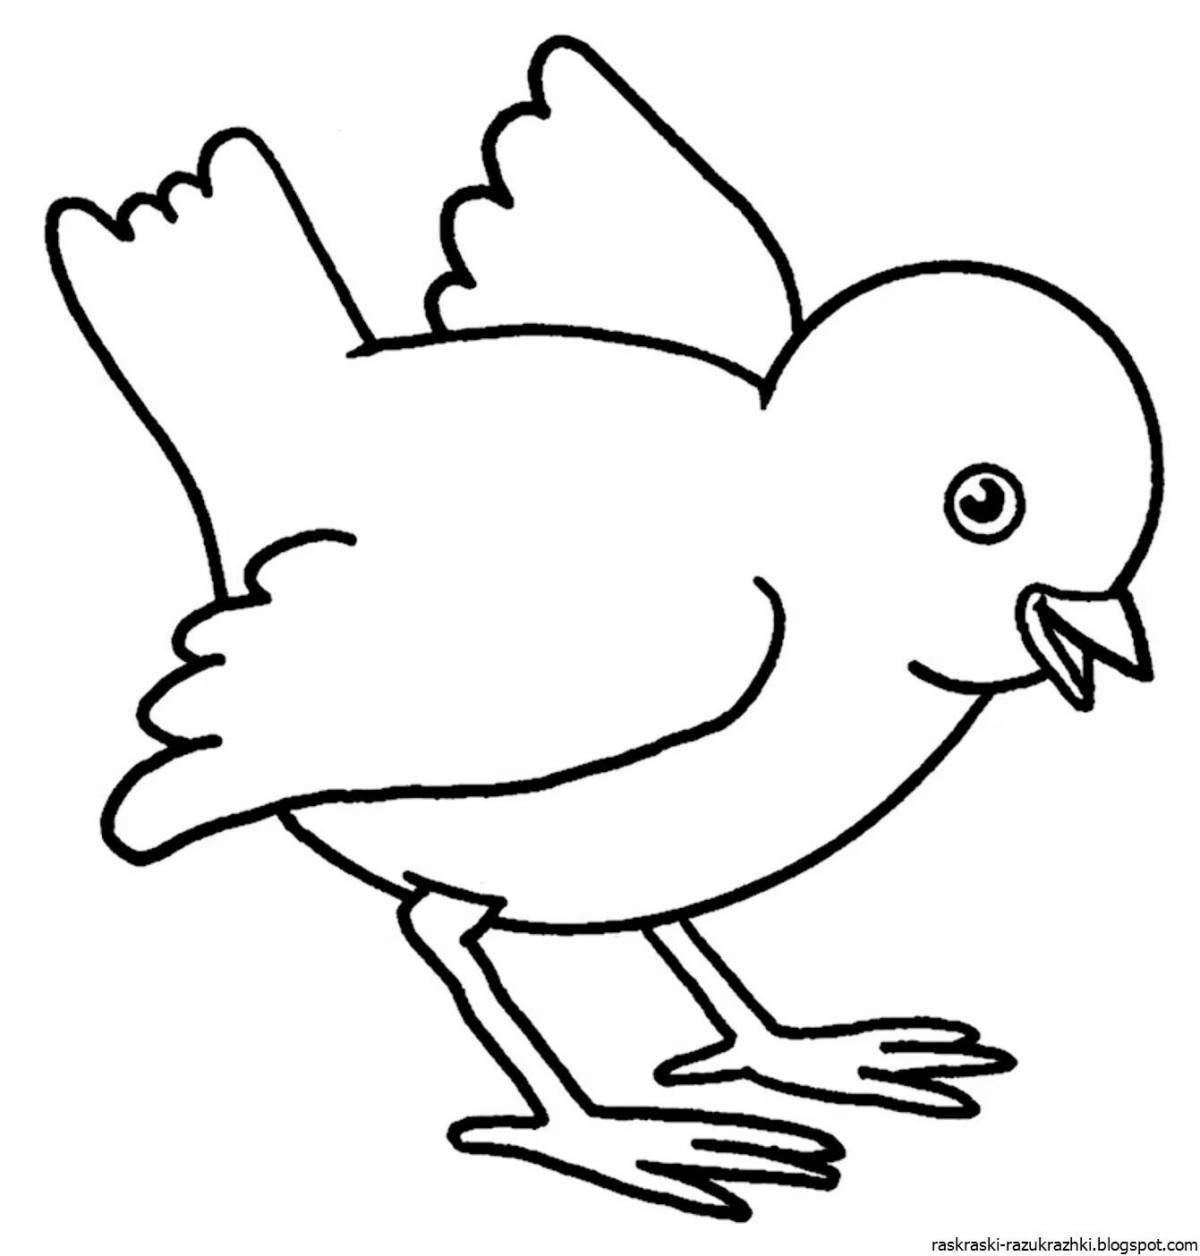 Living bird coloring page for little ones